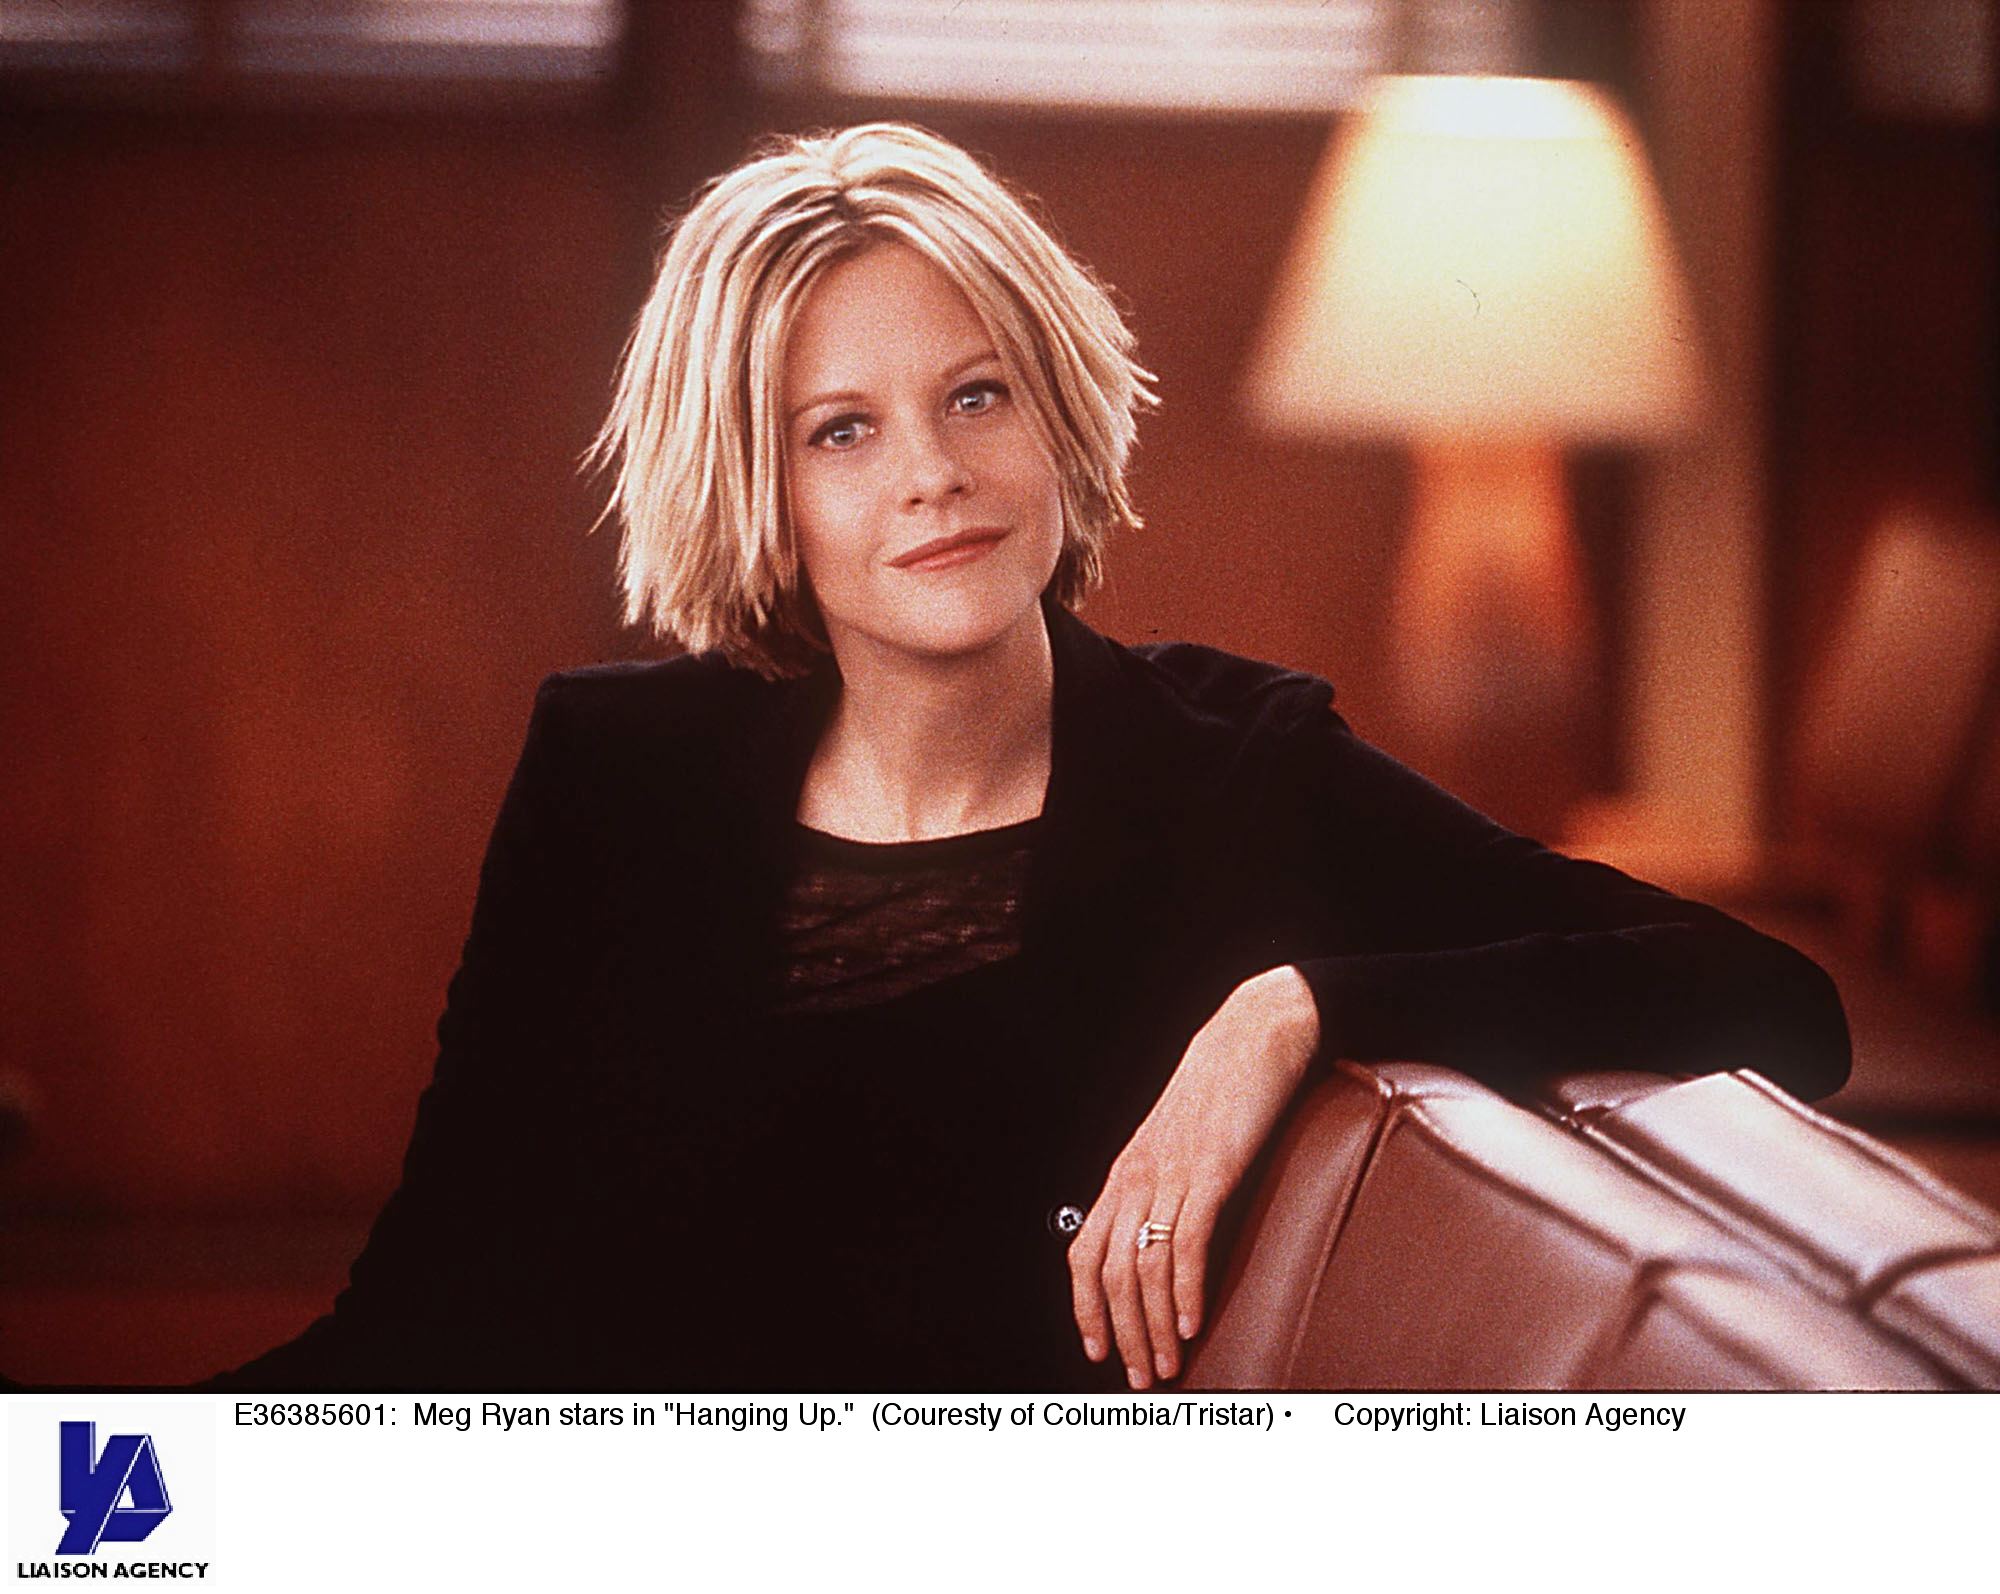 Meg Ryan in "Hanging Up," circa 2000 | Source: Getty Images